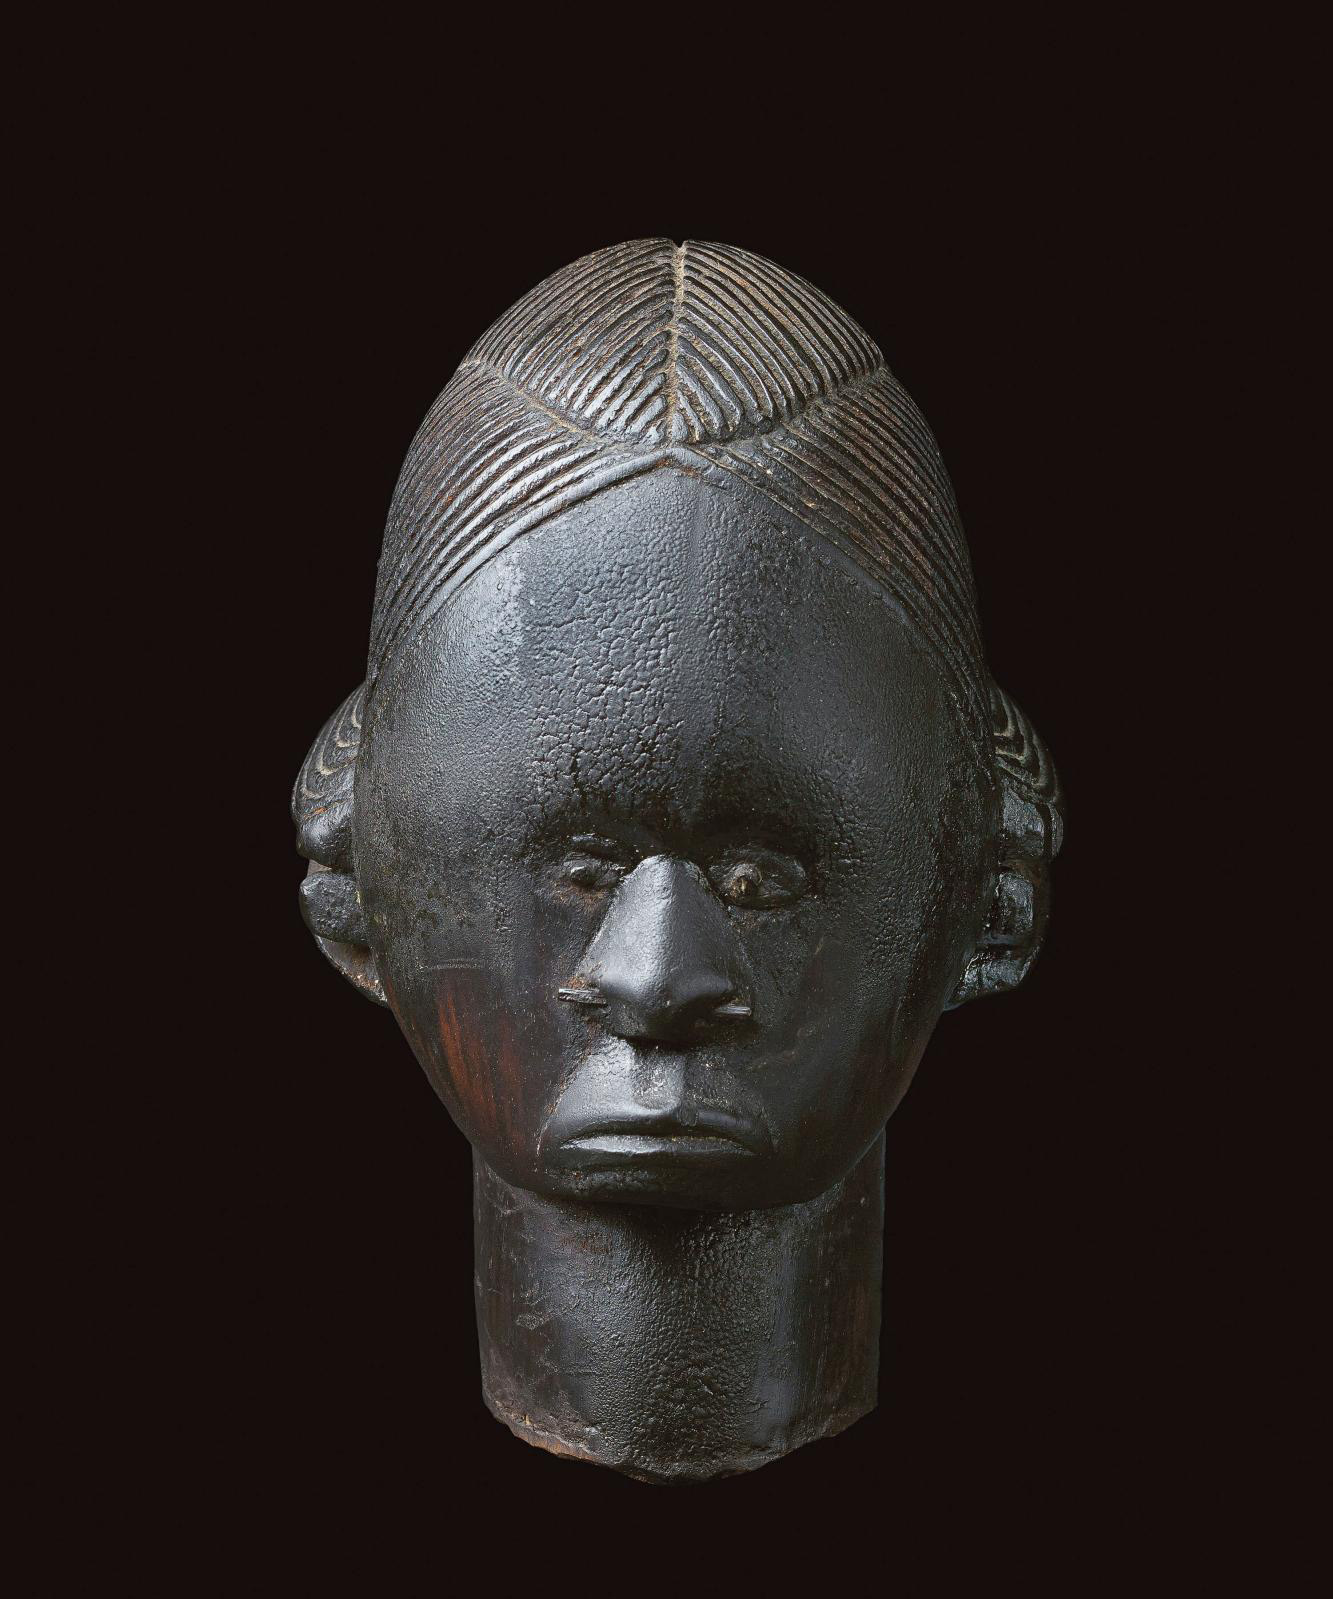 Wood and iron reliquary head. Gabon, Fang-Betsi, c. 1700-1850.Photo: Matt Pia - Al Thani Collection. All rights reserved